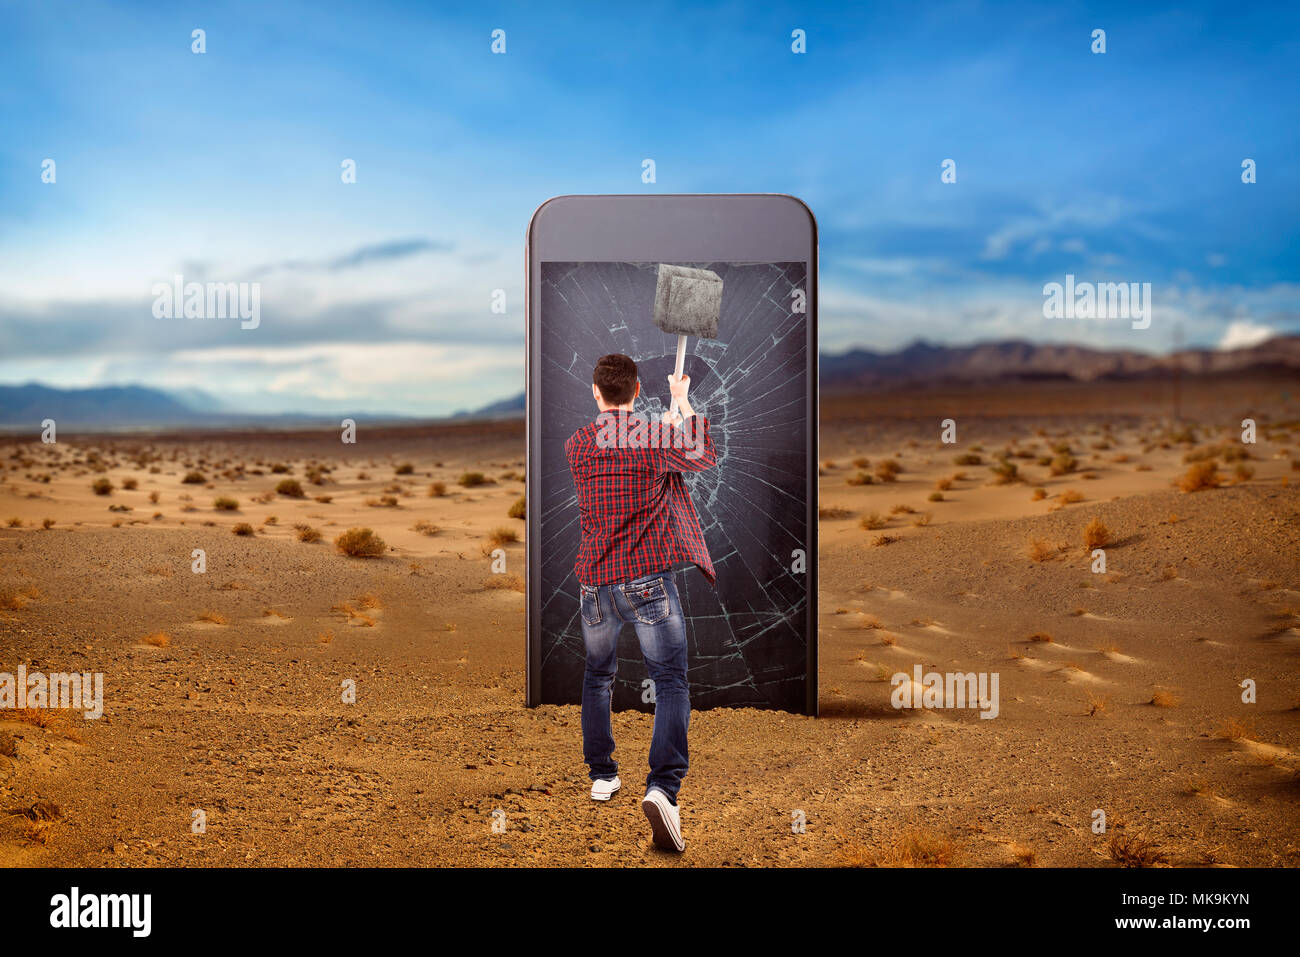 Phone addicted people, loneliness in the net concept. Man smashes a large smartphone screen with a sledgehammer, desert valley on background. Manipula Stock Photo